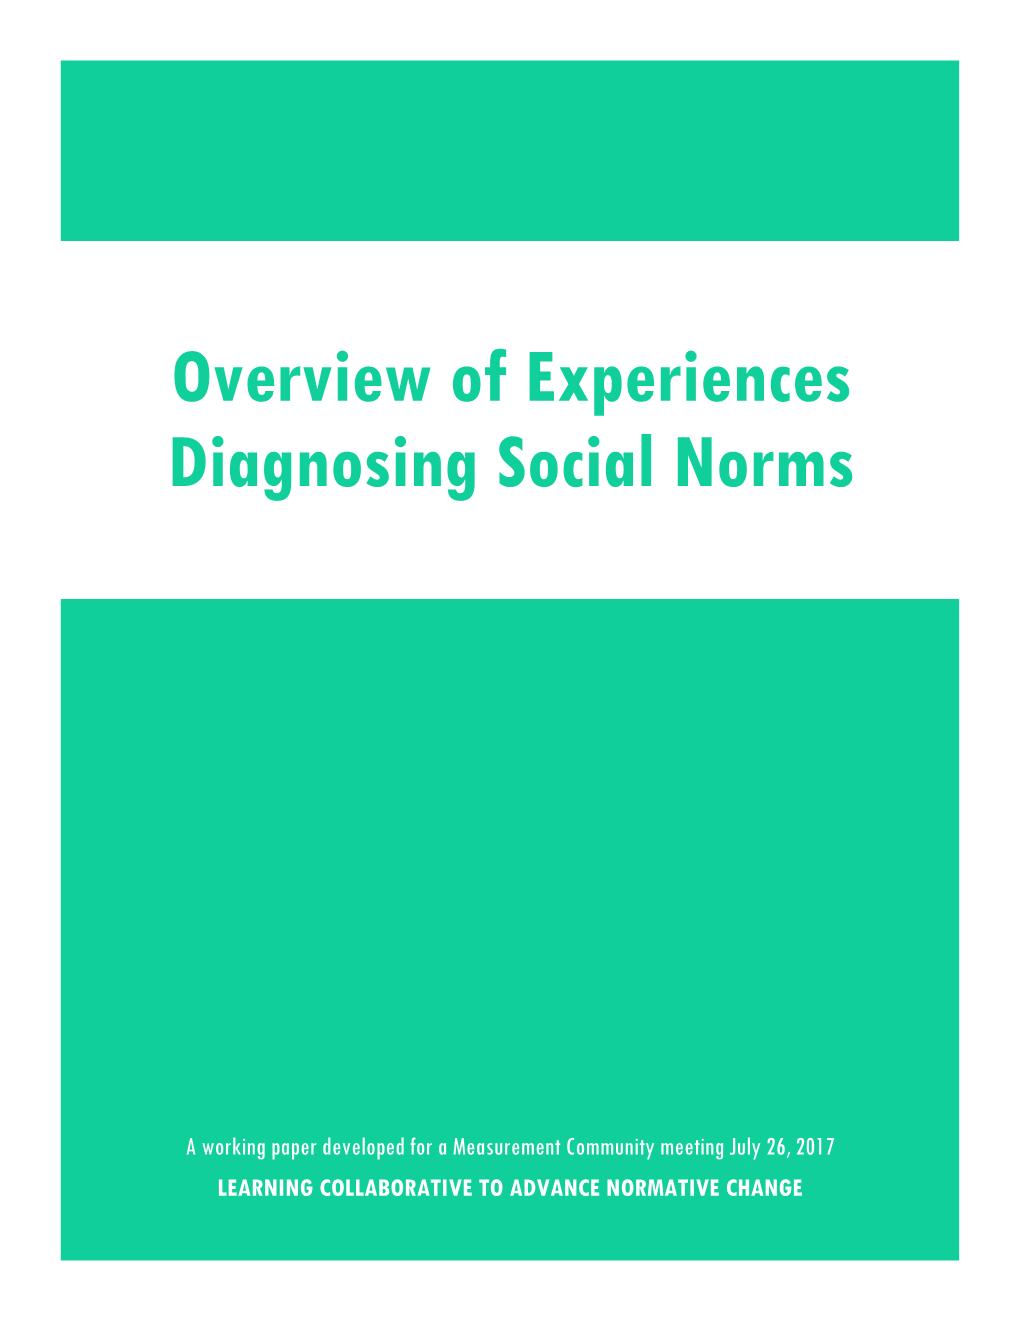 Overview of Experiences Diagnosing Social Norms